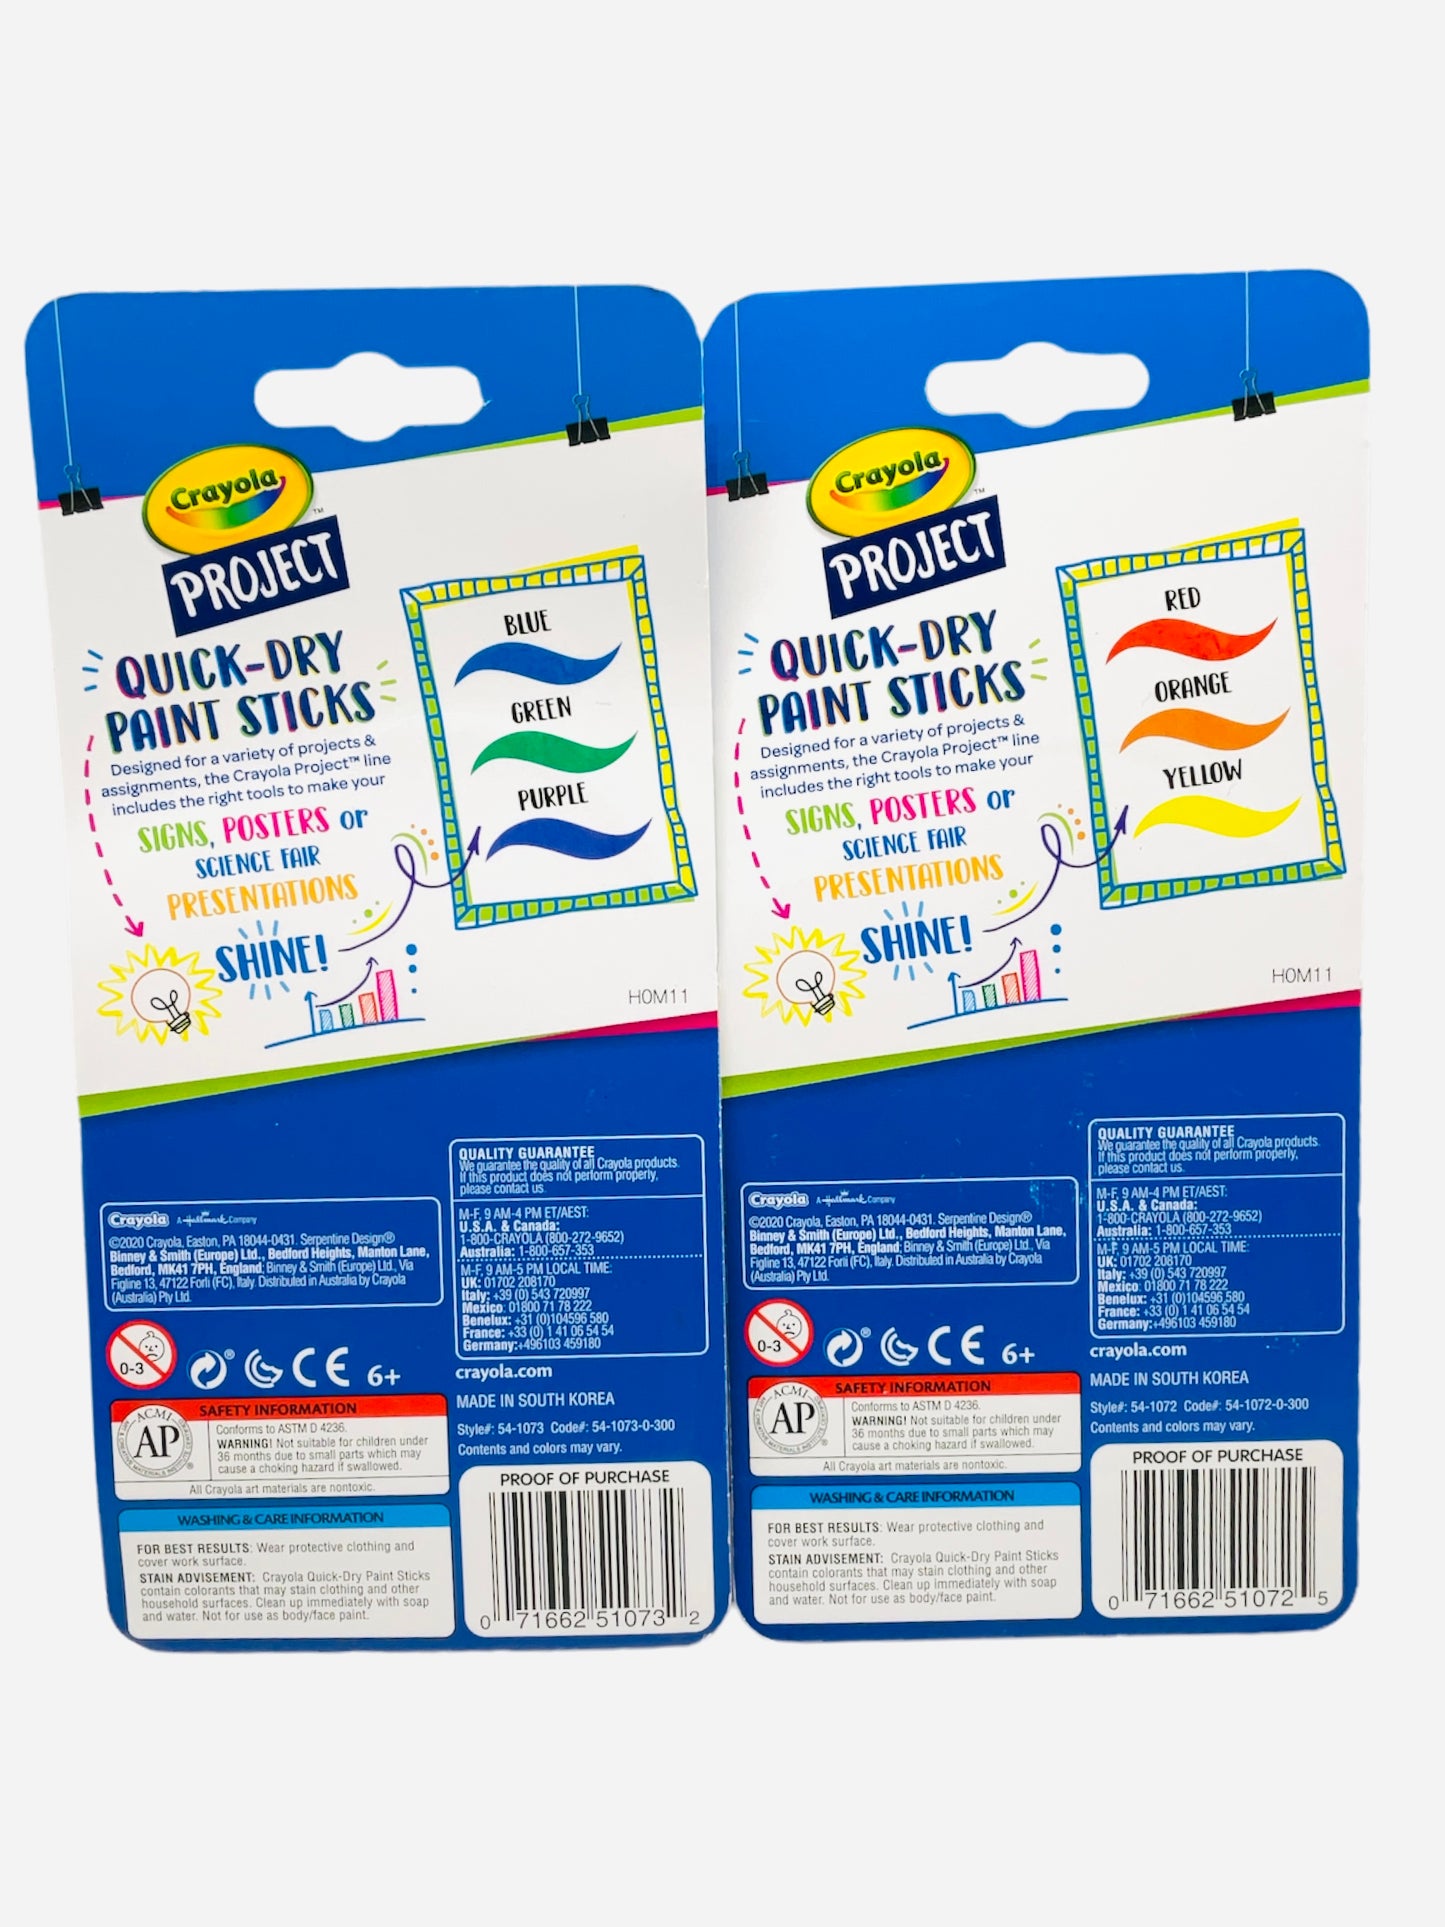 Crayola Project Quick-Dry Paint Sticks (1 Pack Colors May Vary Chosen at Random)